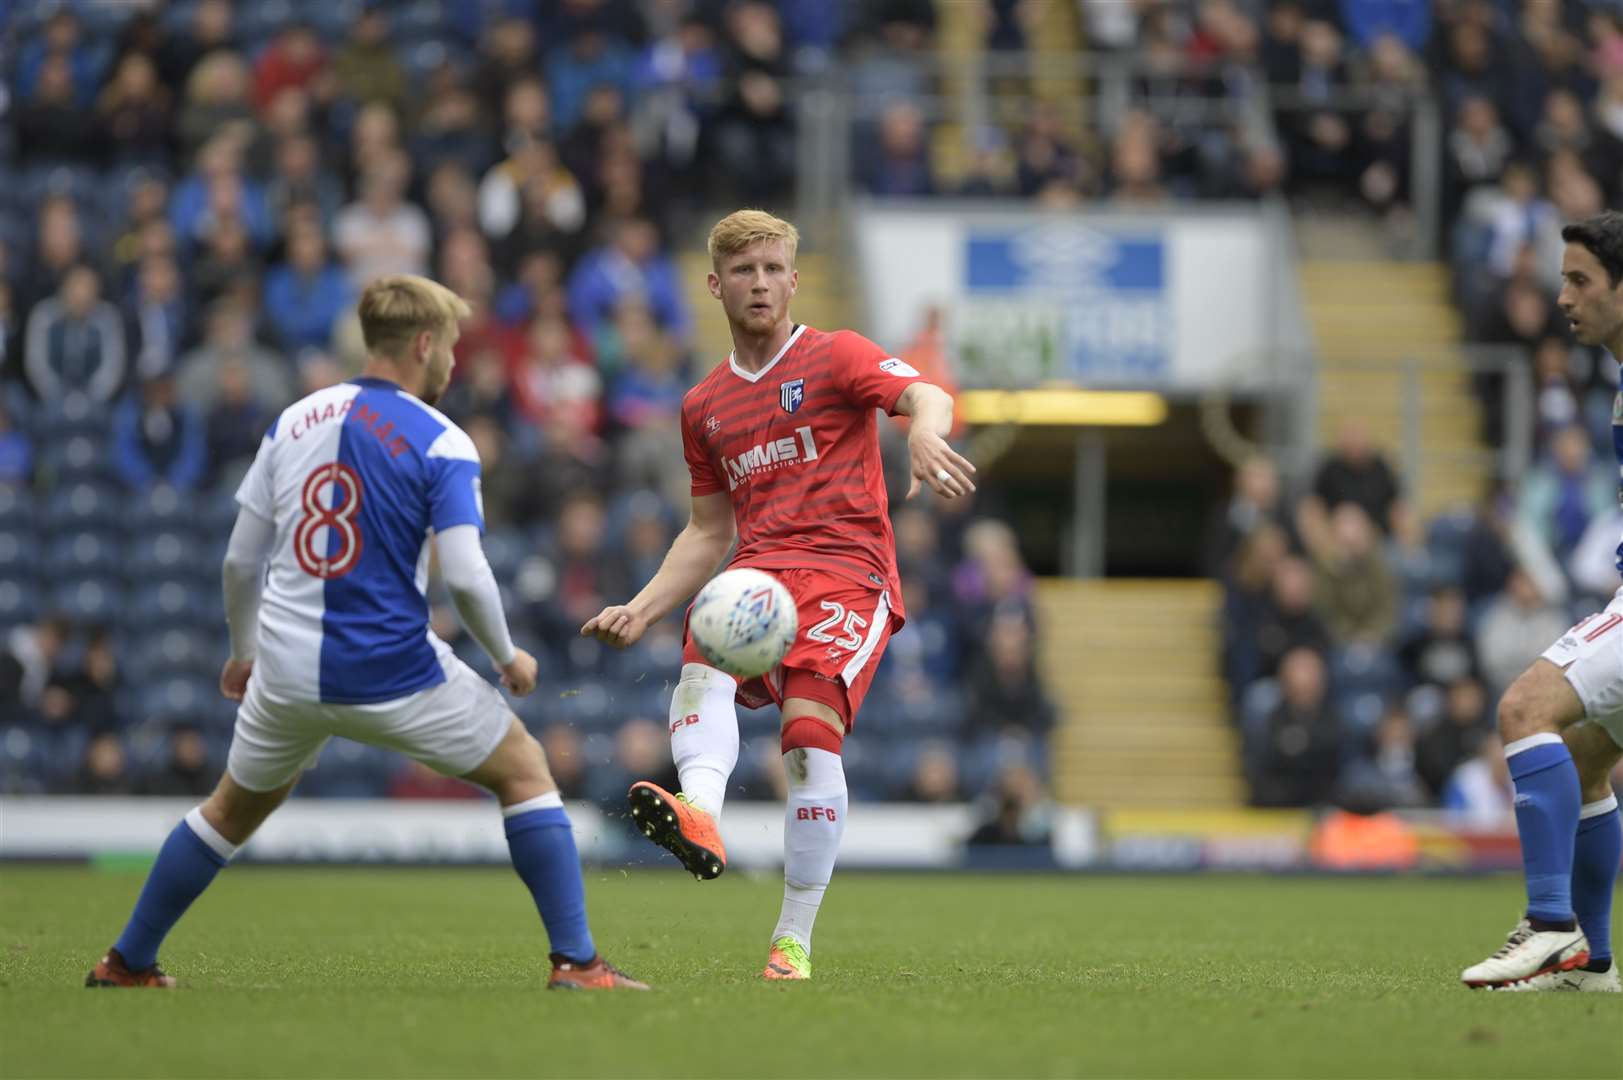 Finn O'Mara in action for Gillingham against Blackburn Rovers Picture: Barry Goodwin